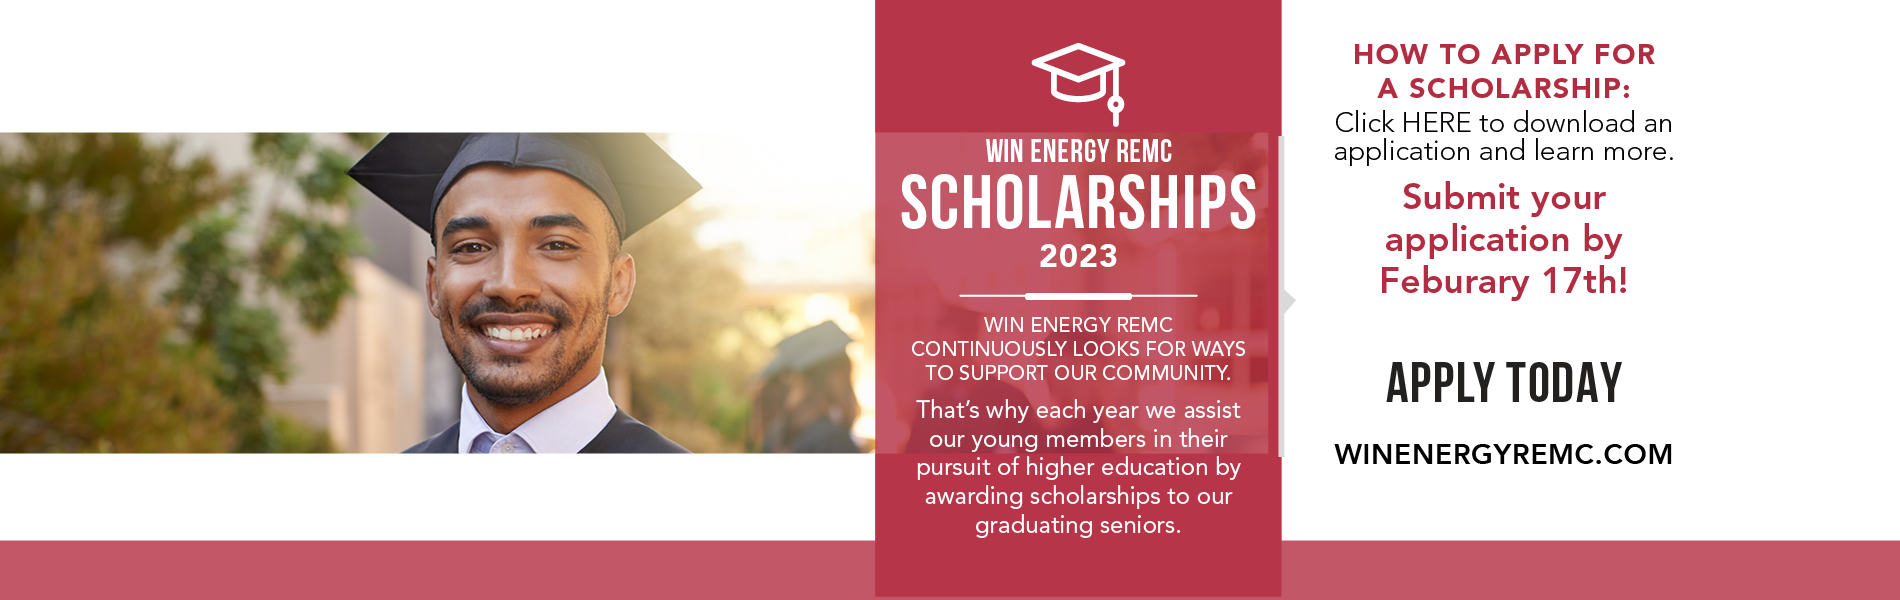 Image of graduate on white background with information on WIN Energy REMC Scholarships due to WIN Energy REMC February 17.